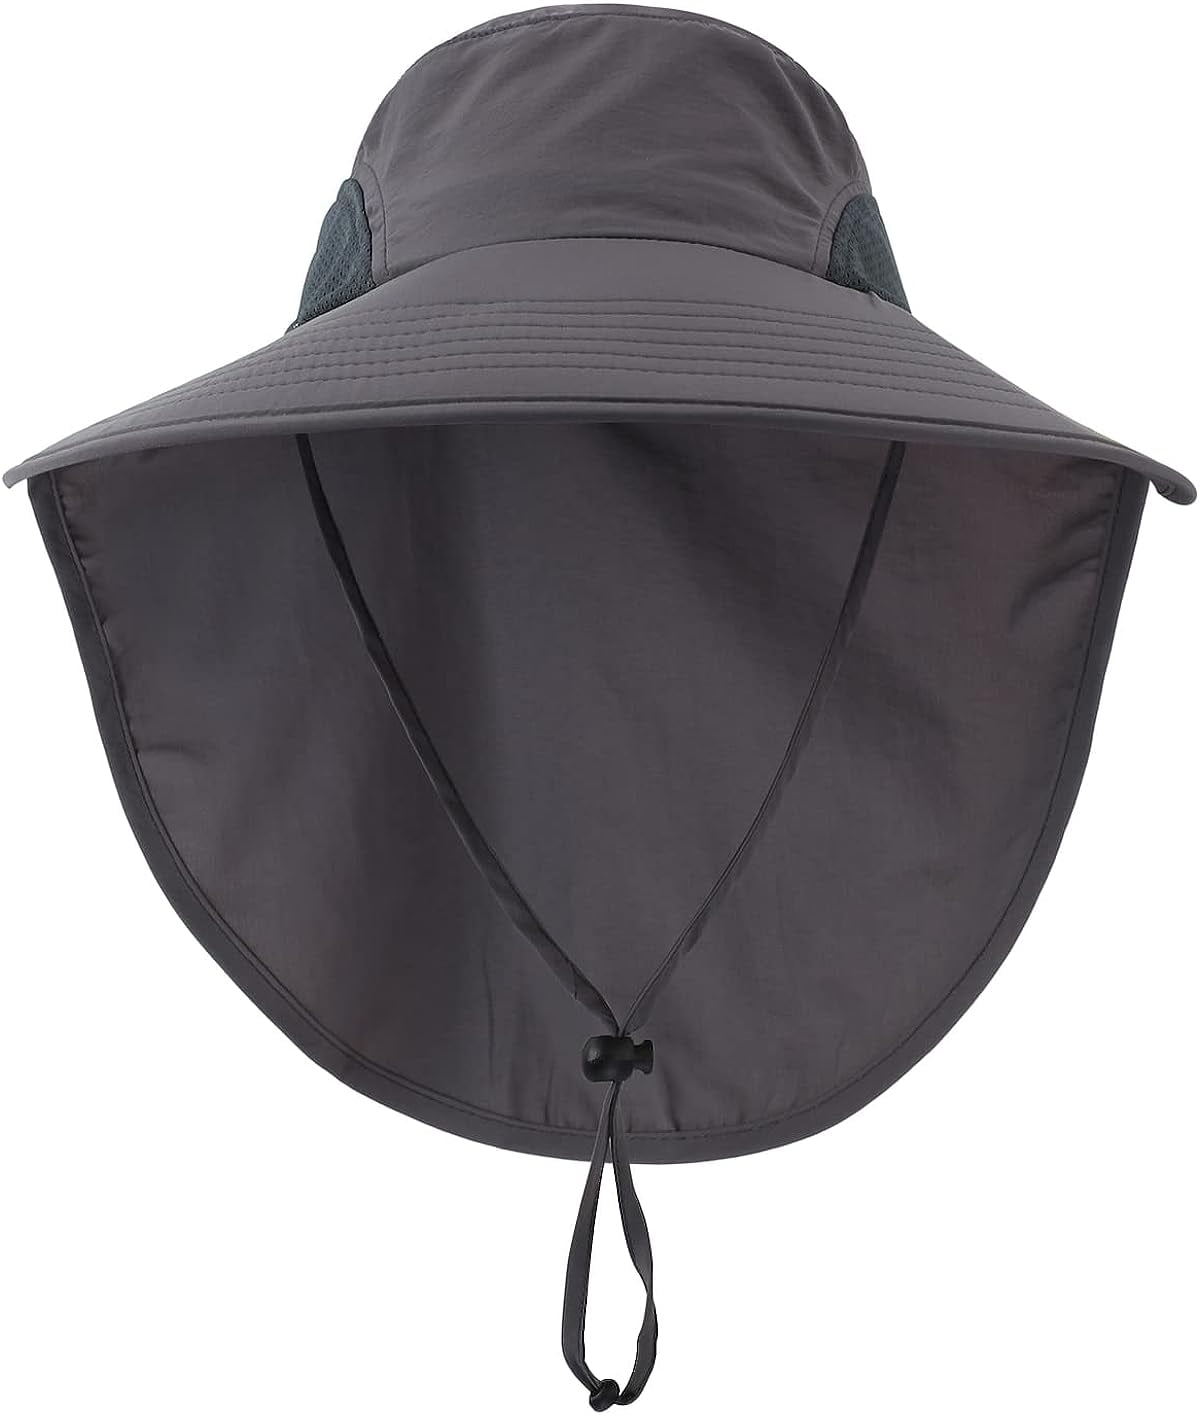 Moobody Sun Hat Protection Wide Brim Neck Flap Face Cover Multifunctional For Hiking Fishing Beach Other One Size